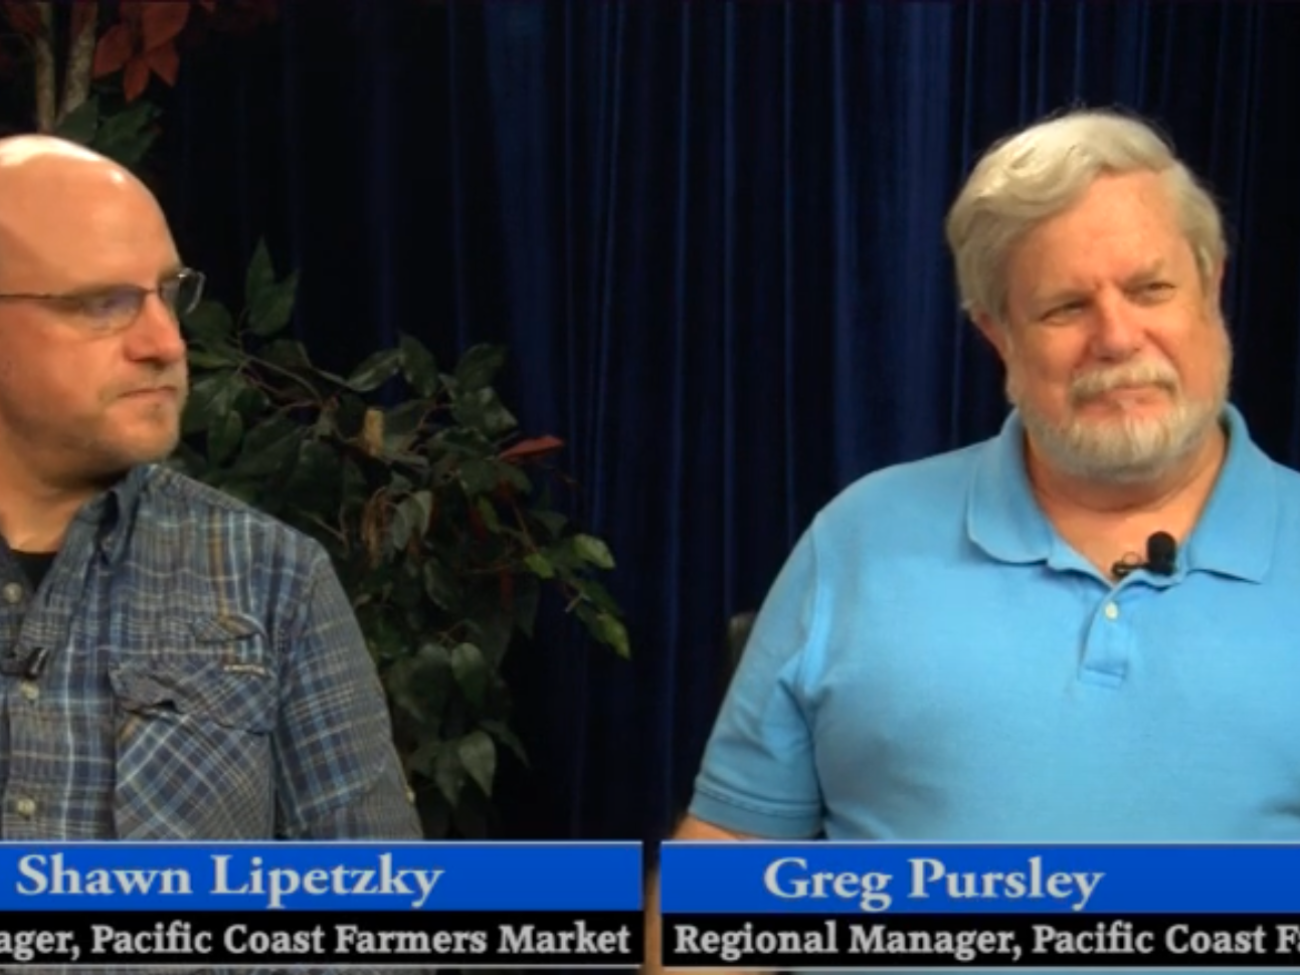 Senior Moment with Guests, Shawn Lipetzky & Greg Pursley